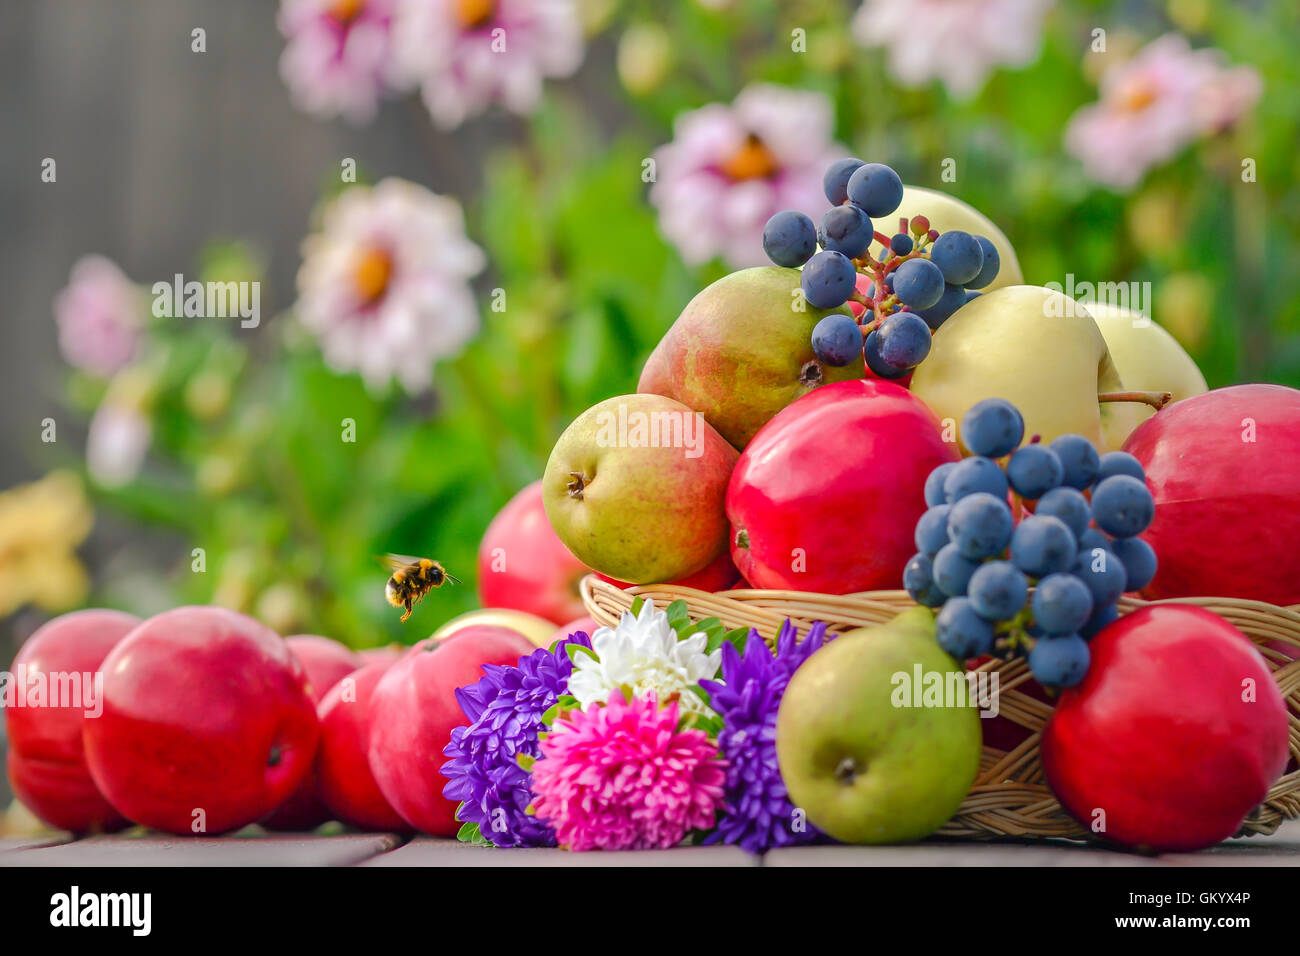 fruits, apples, grapes, summer, home garden, healthy food Stock Photo